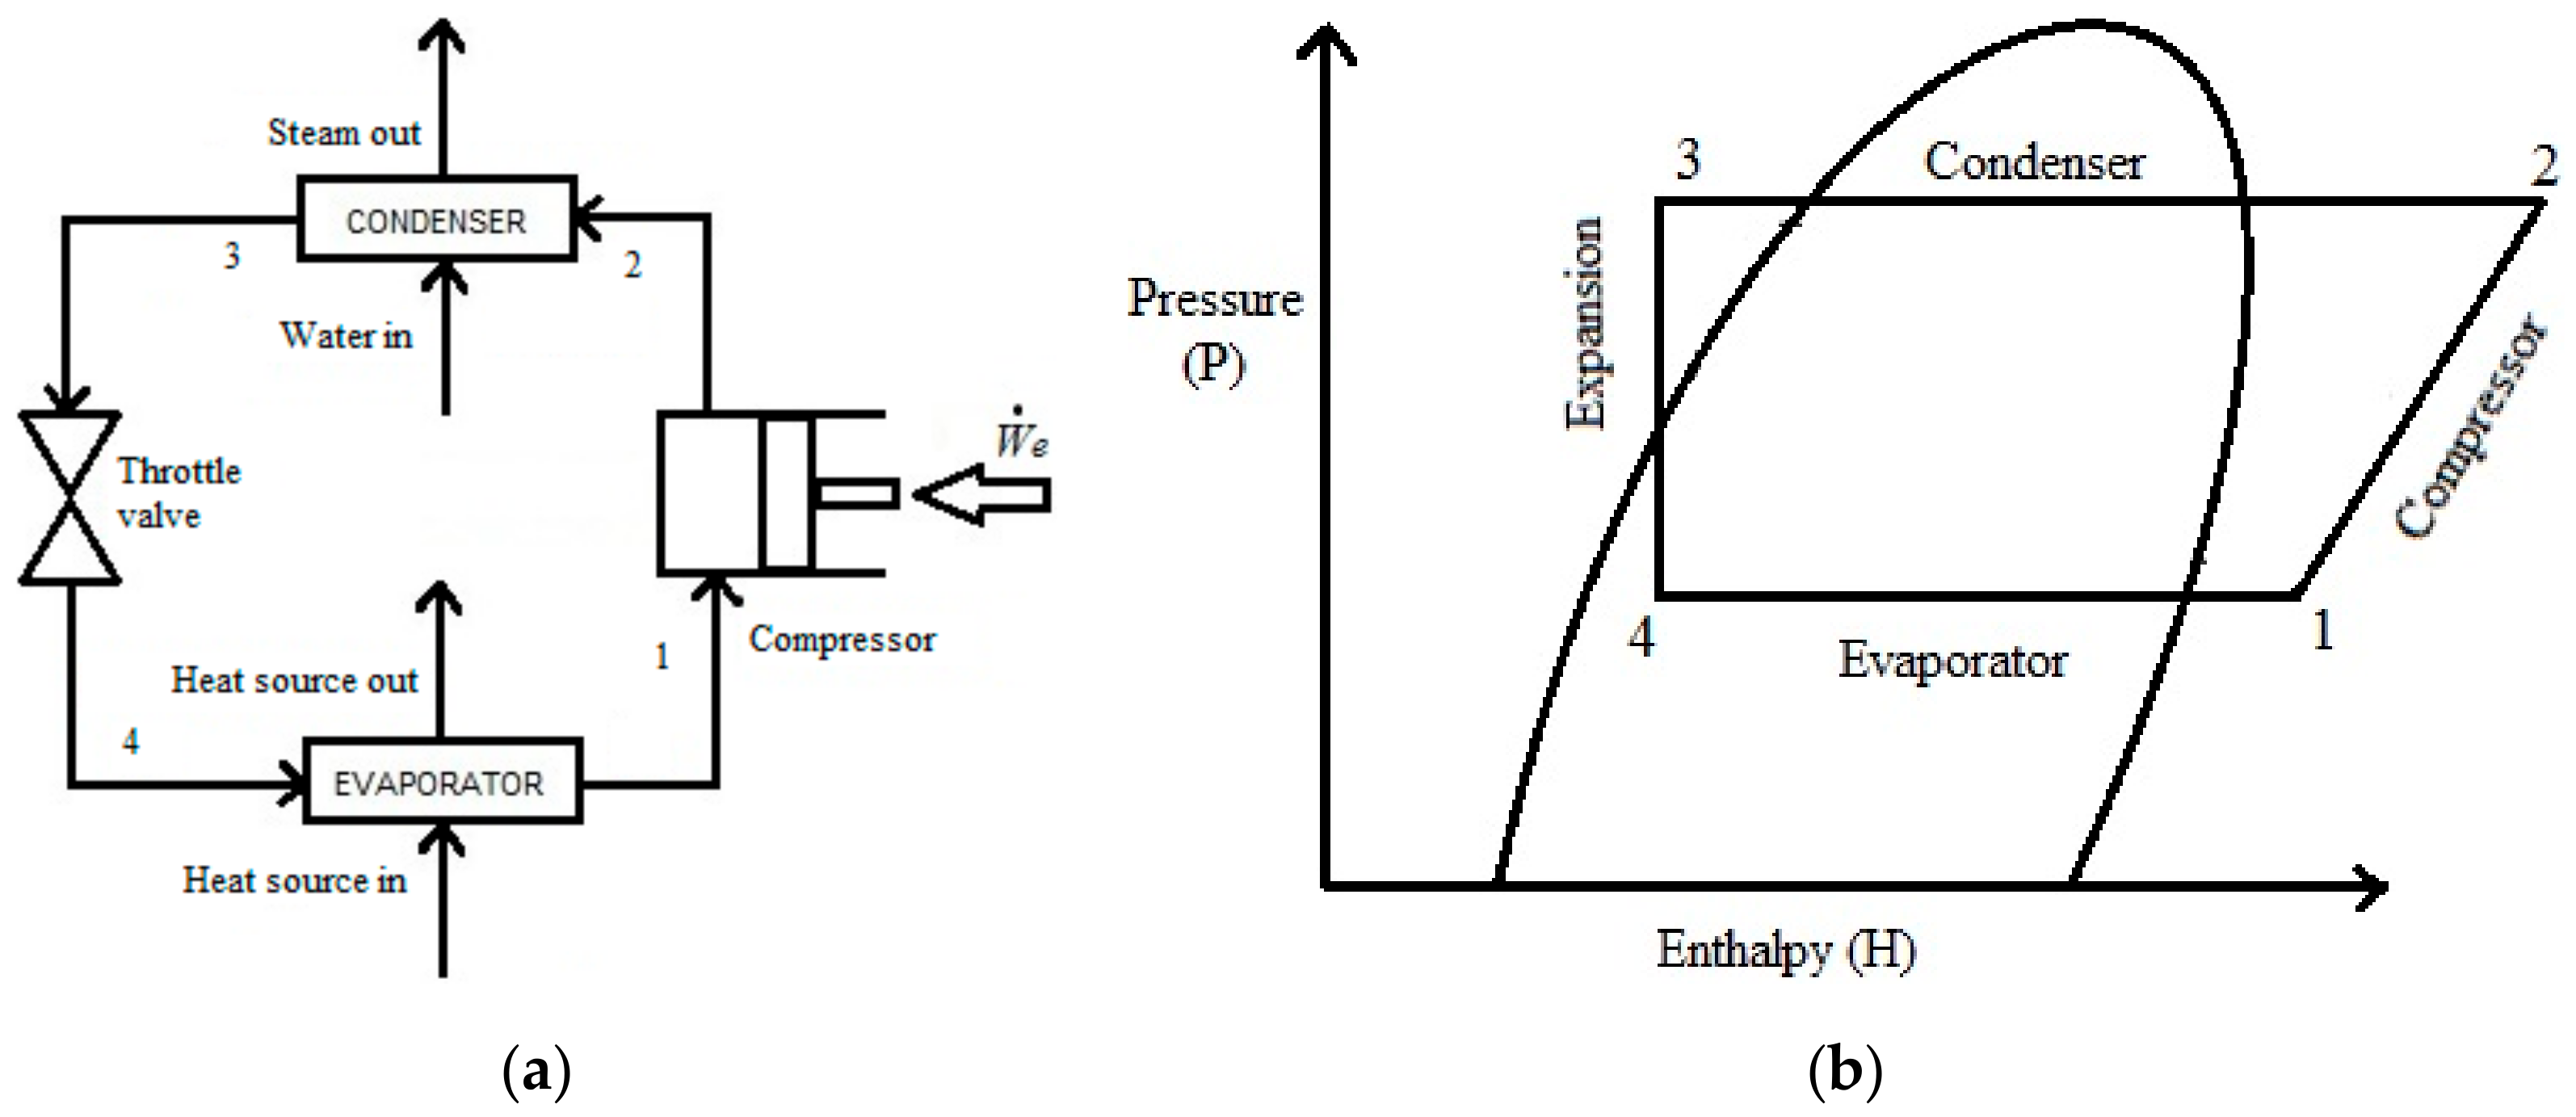 Energies | Free Full-Text | Recovery and Utilization of Low-Grade Waste  Heat in the Oil-Refining Industry Using Heat Engines and Heat Pumps: An  International Technoeconomic Comparison | HTML